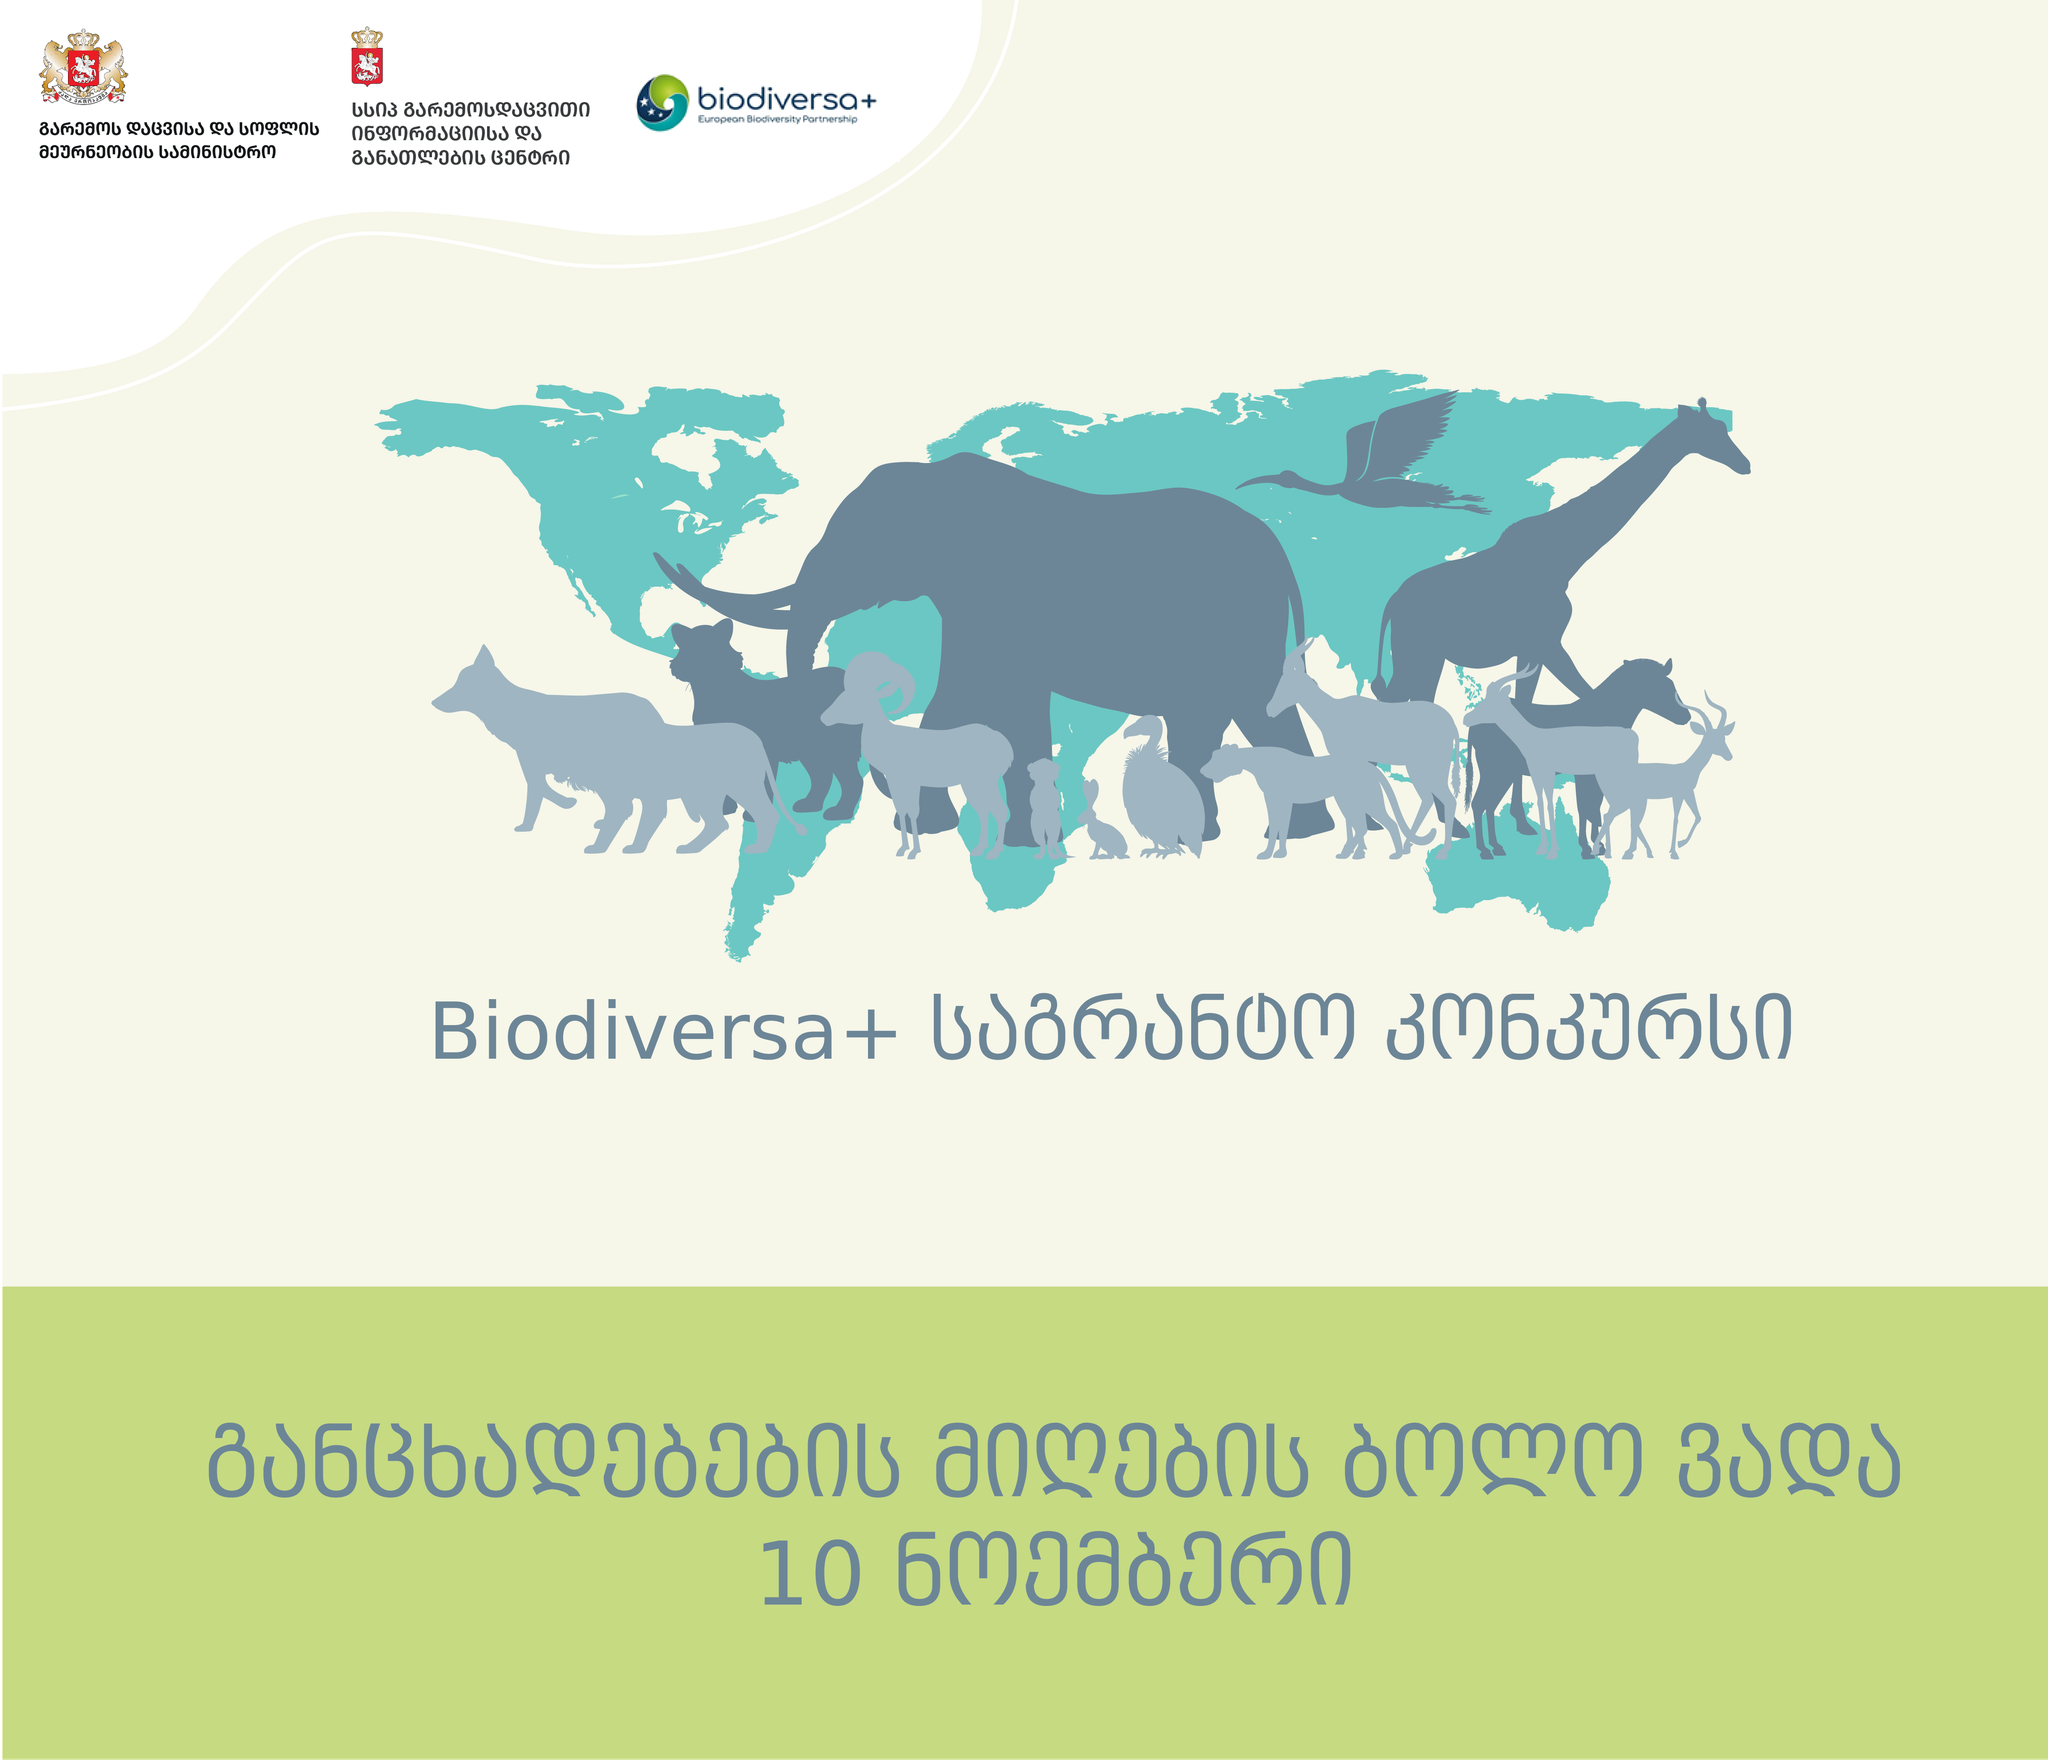 (BIODIVERSA+) ‘’ Nature-based solutions (NBS) for biodiversity, human well-being, and transformative changes’’ calls for applications